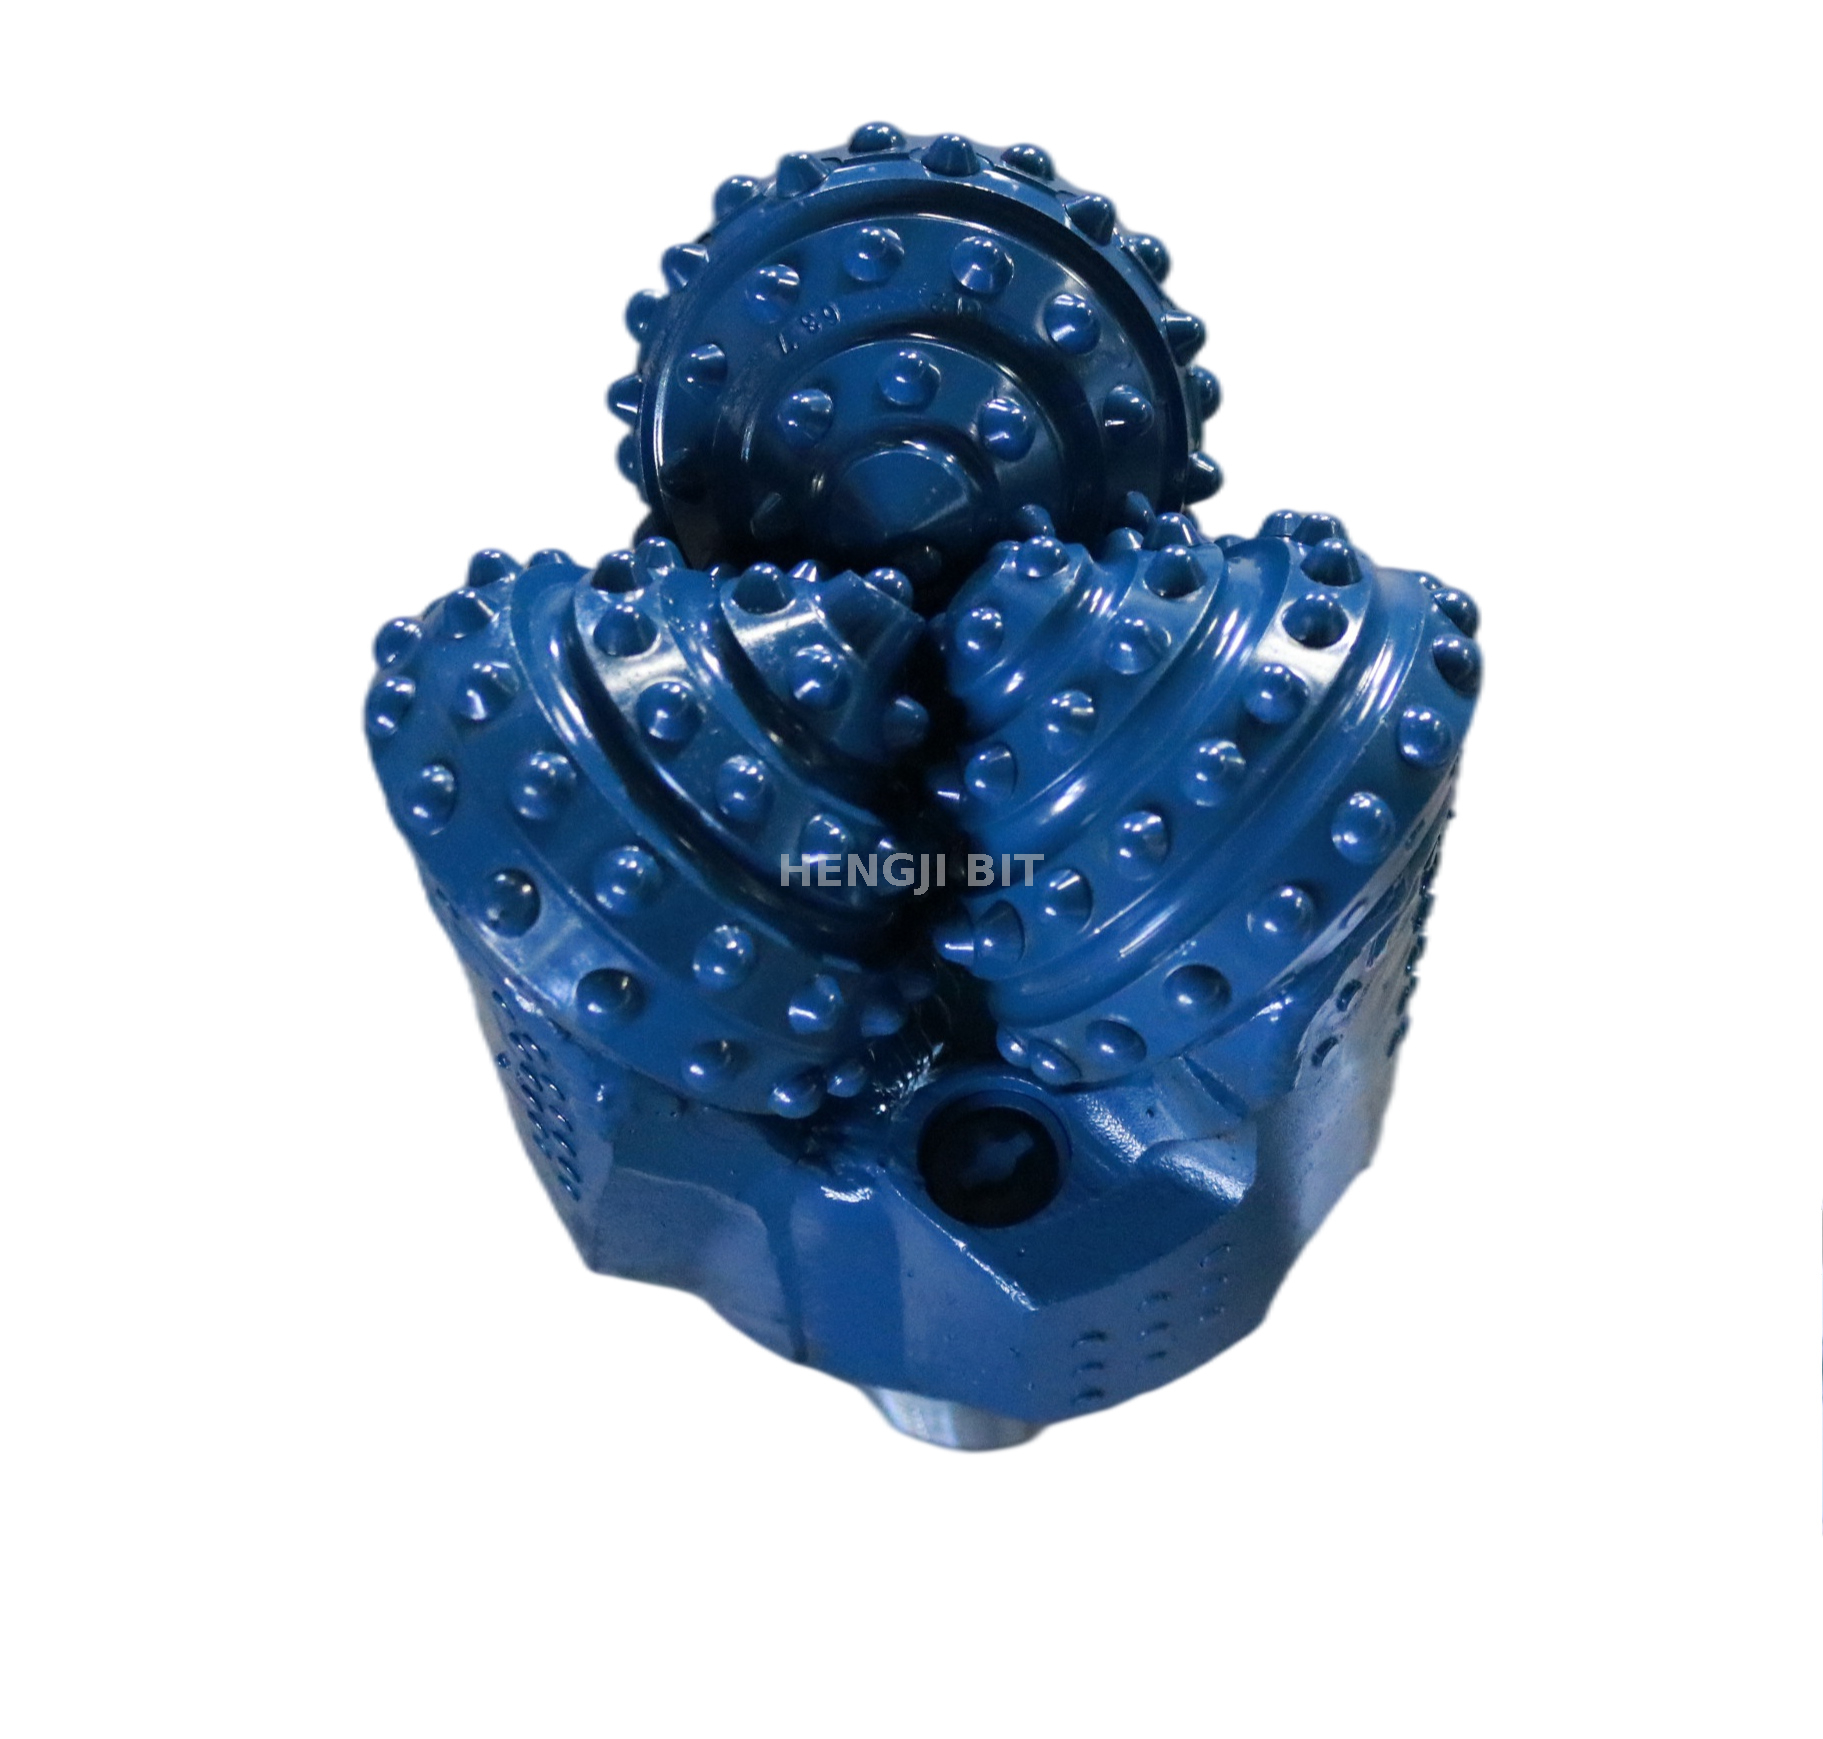 API 6 1/2" Iadc 617Y Tungsten Carbide Drill Rock Bit Tricone Rotary Bit for Well Drilling